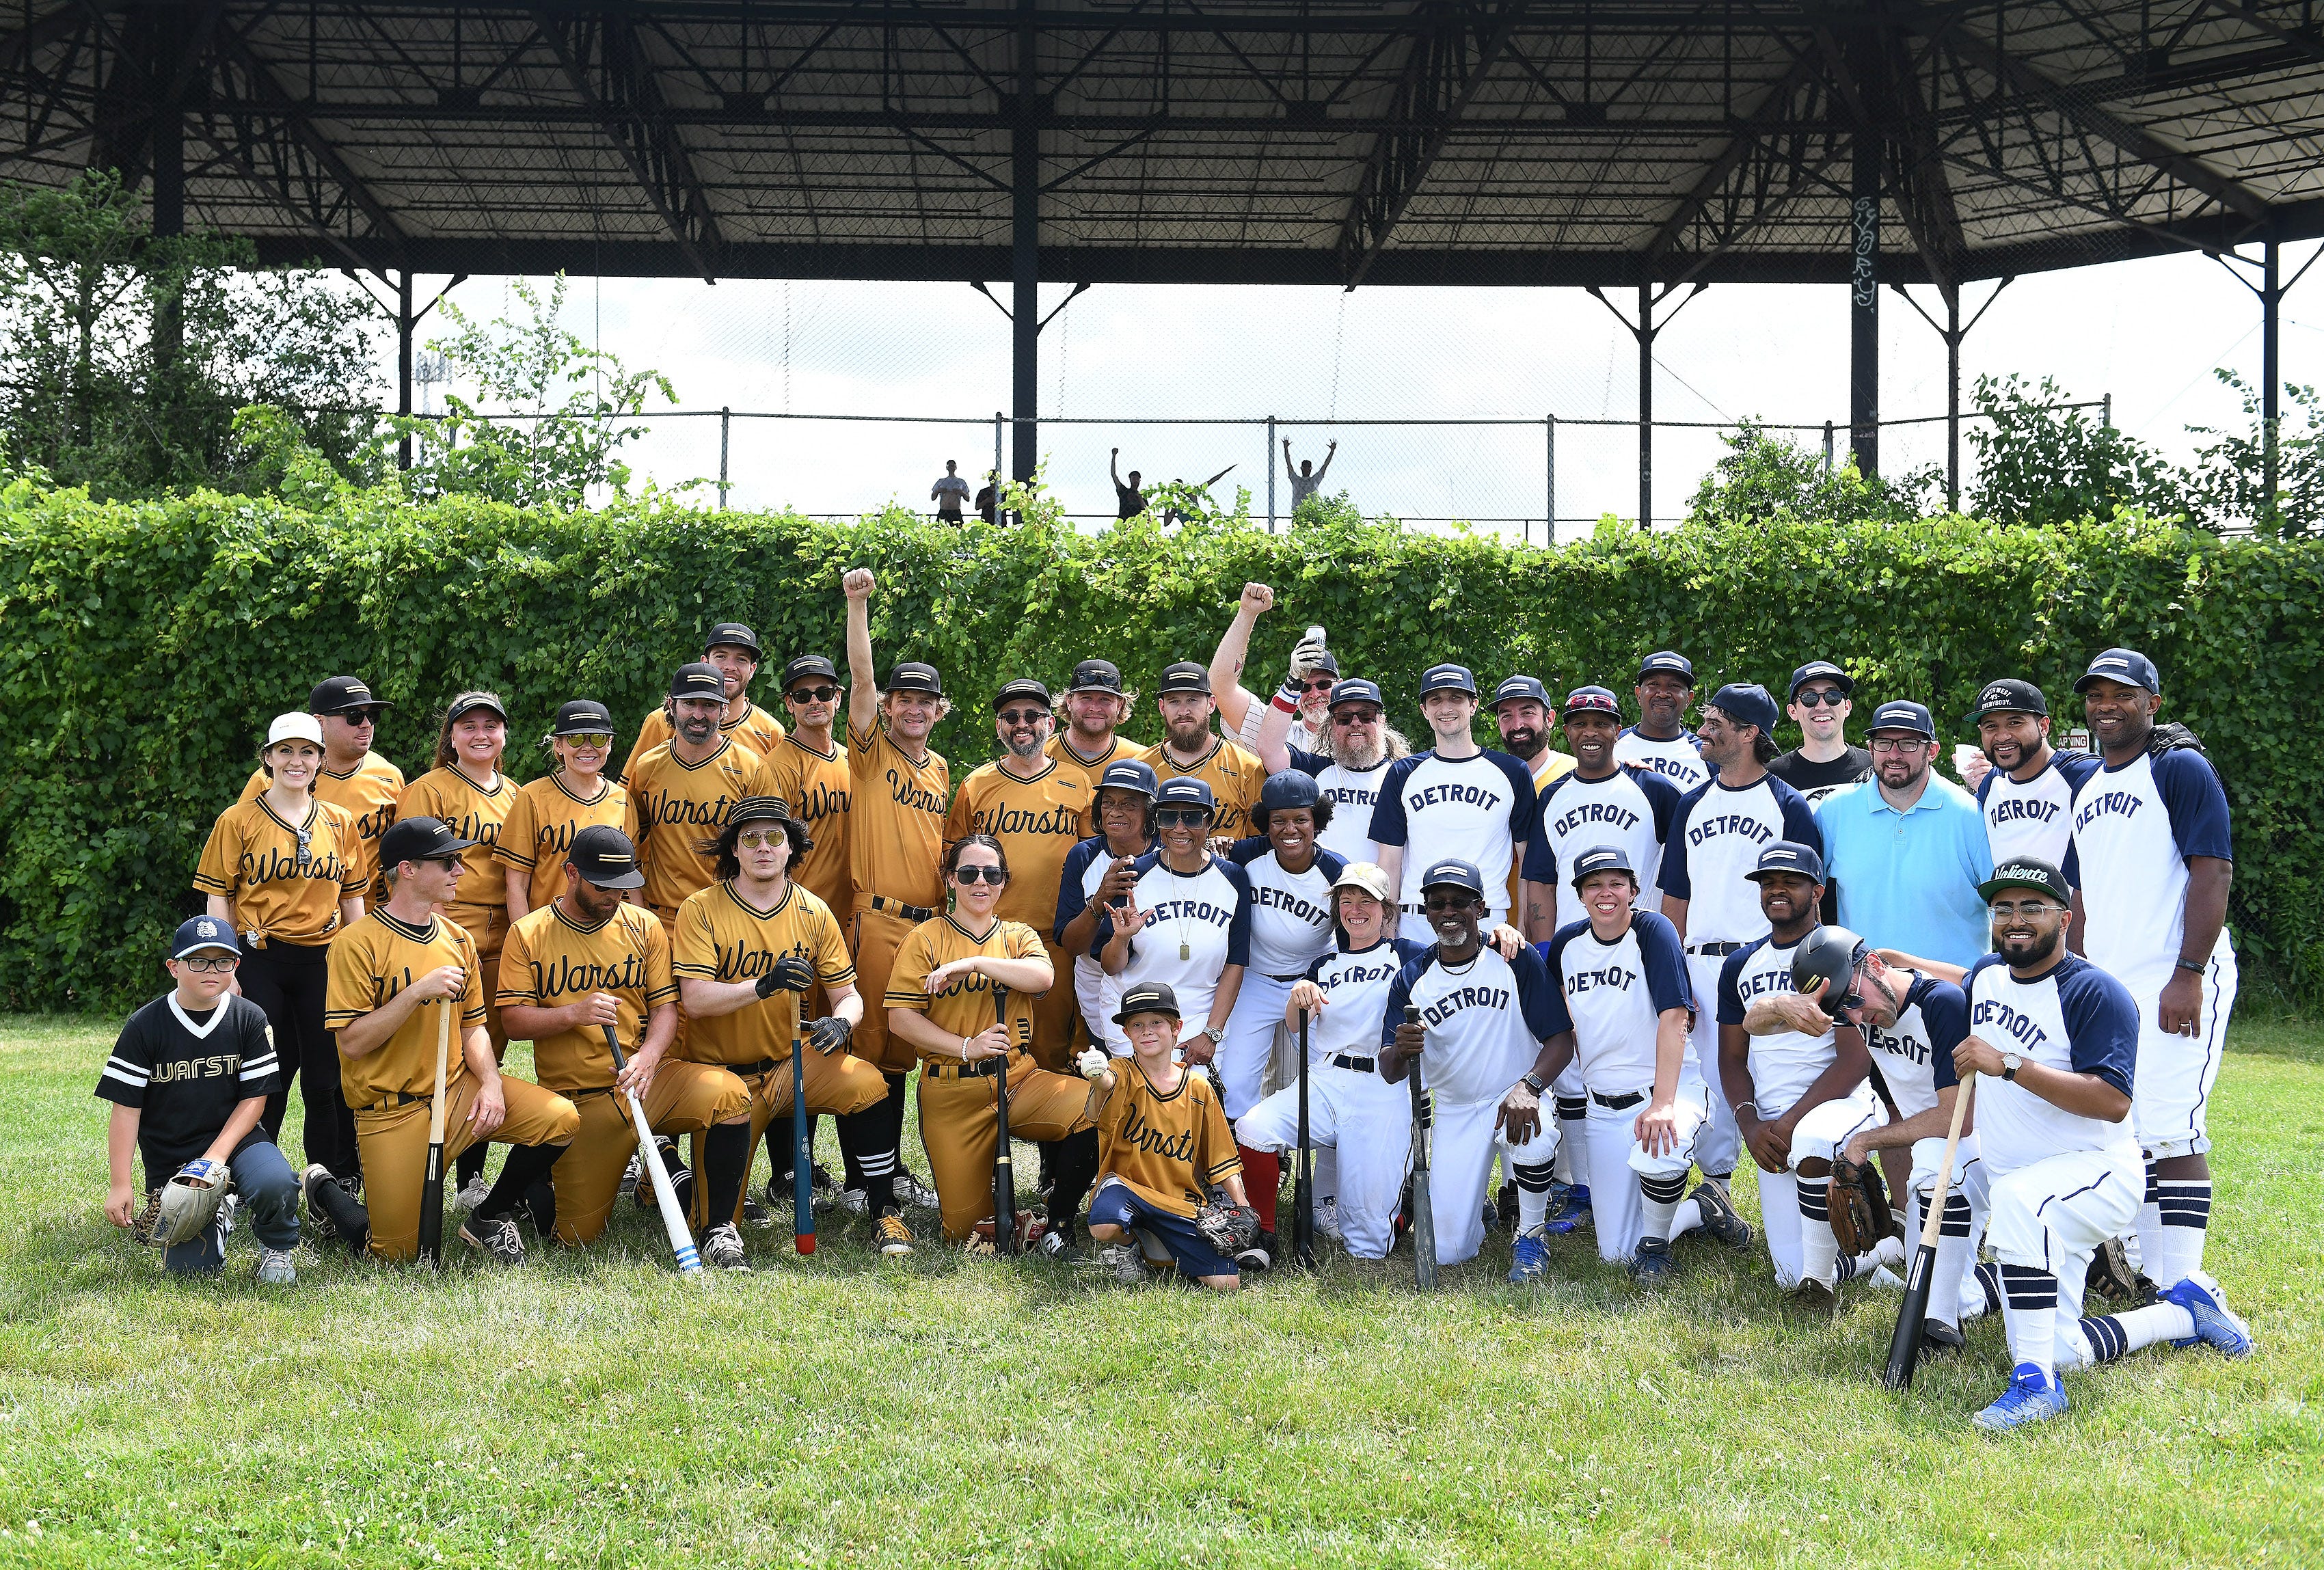 The team photo after the sandlot style baseball game between the Warstic Woodmen and the Detroit Stars at Hamtramck Stadium in Hamtramck, Mich. on July 11, 2019. Jack White has donated $10,000 towards the renovation and restoration of the stadium, once home to the Detroit Stars Negro League team.